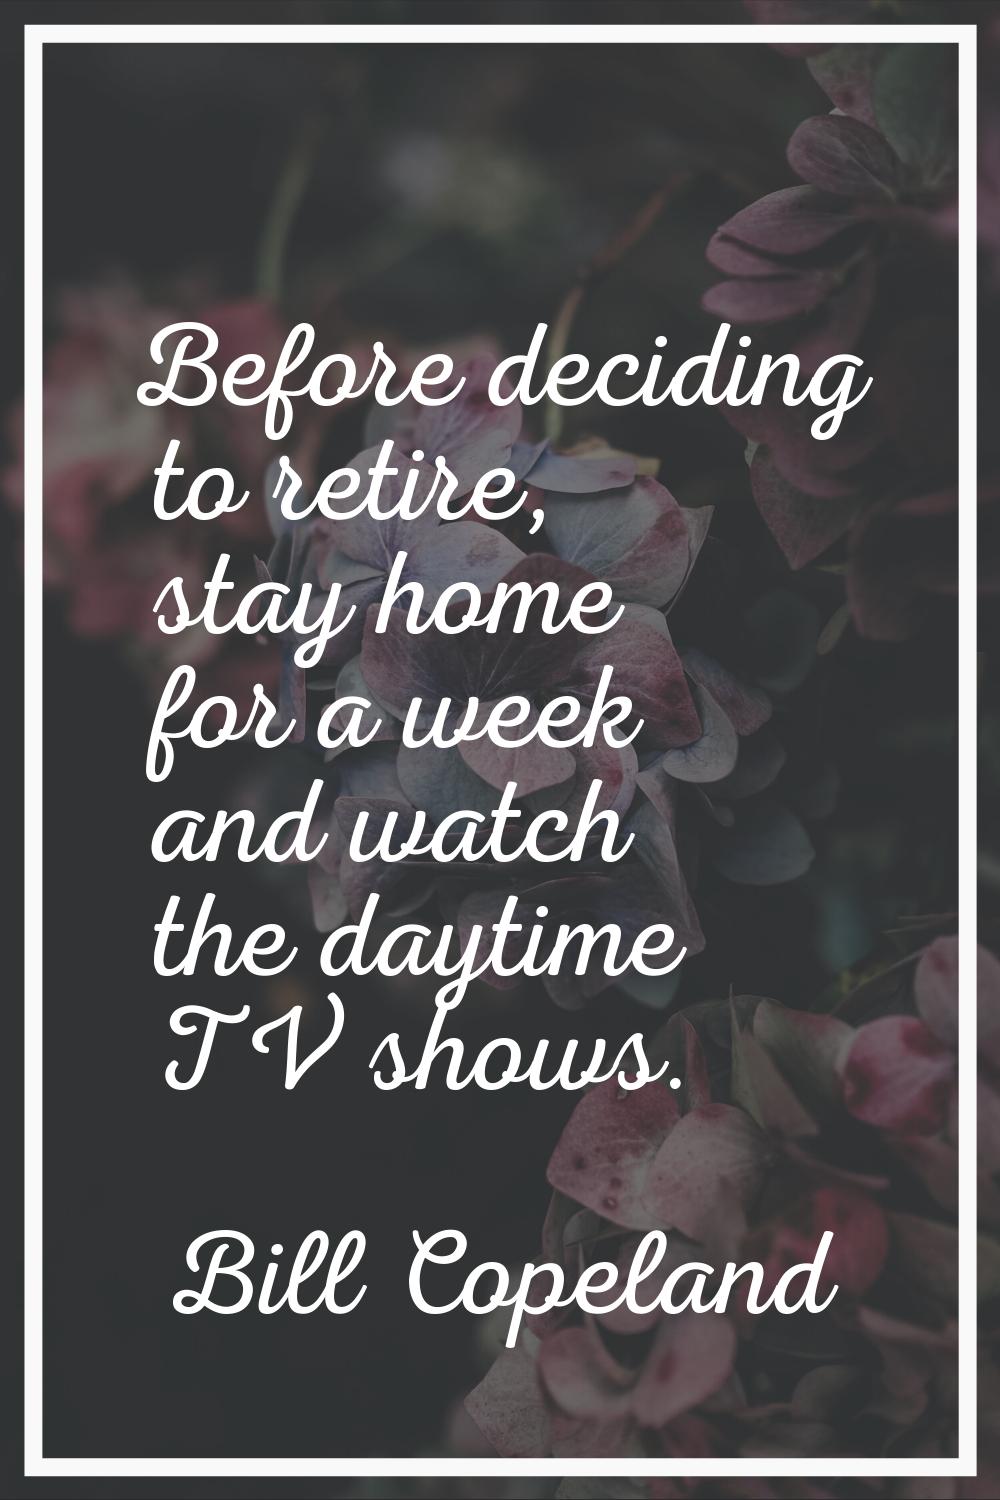 Before deciding to retire, stay home for a week and watch the daytime TV shows.